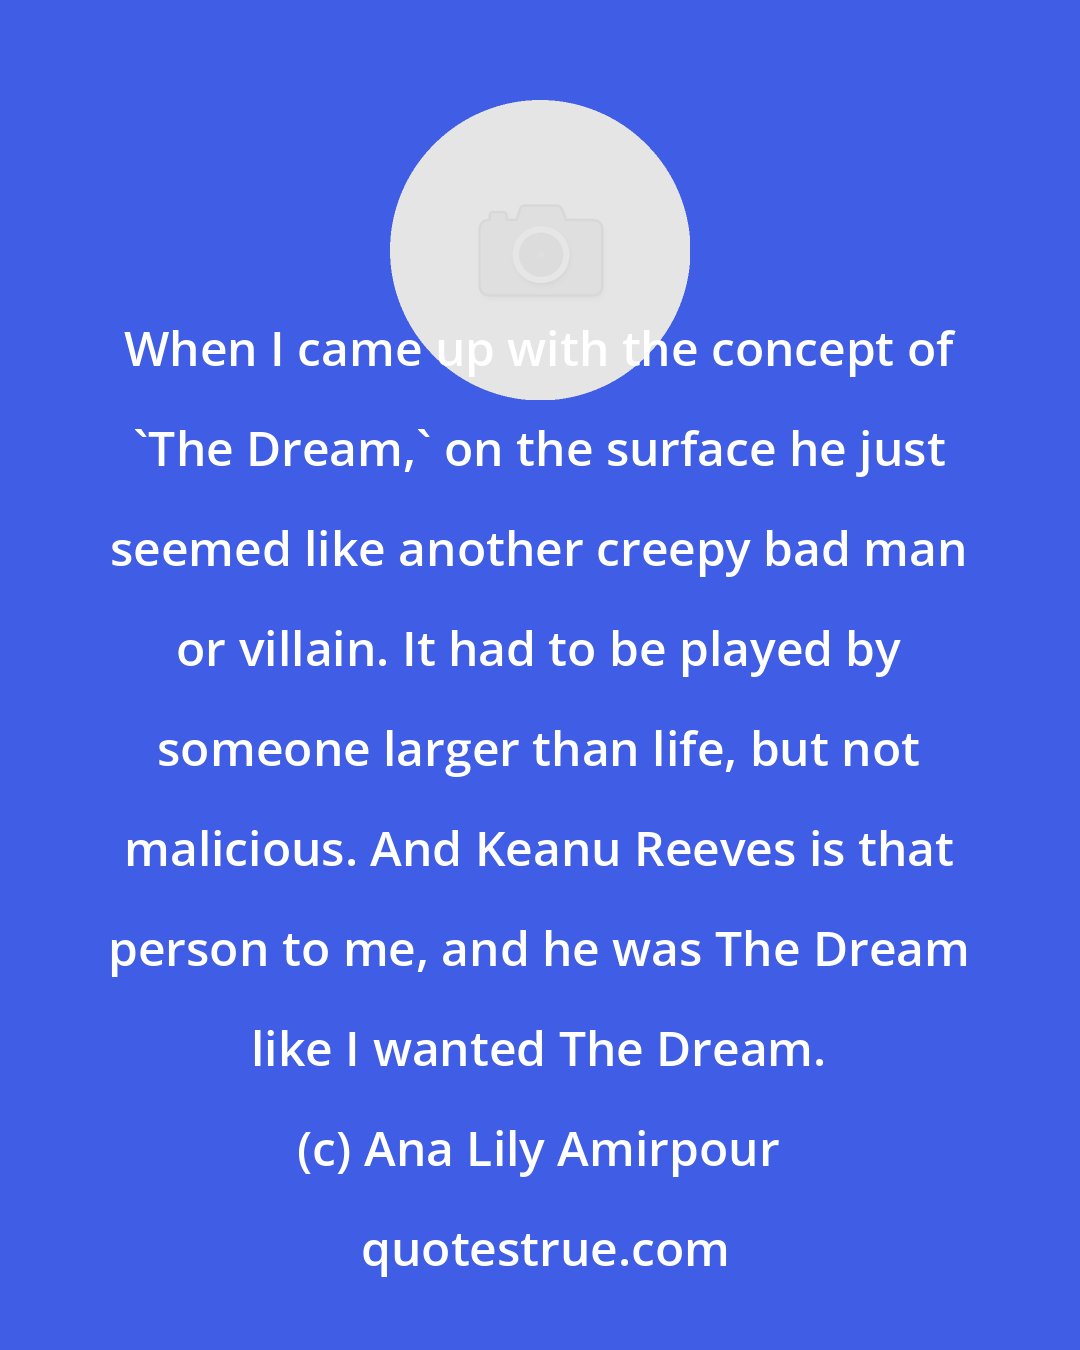 Ana Lily Amirpour: When I came up with the concept of 'The Dream,' on the surface he just seemed like another creepy bad man or villain. It had to be played by someone larger than life, but not malicious. And Keanu Reeves is that person to me, and he was The Dream like I wanted The Dream.